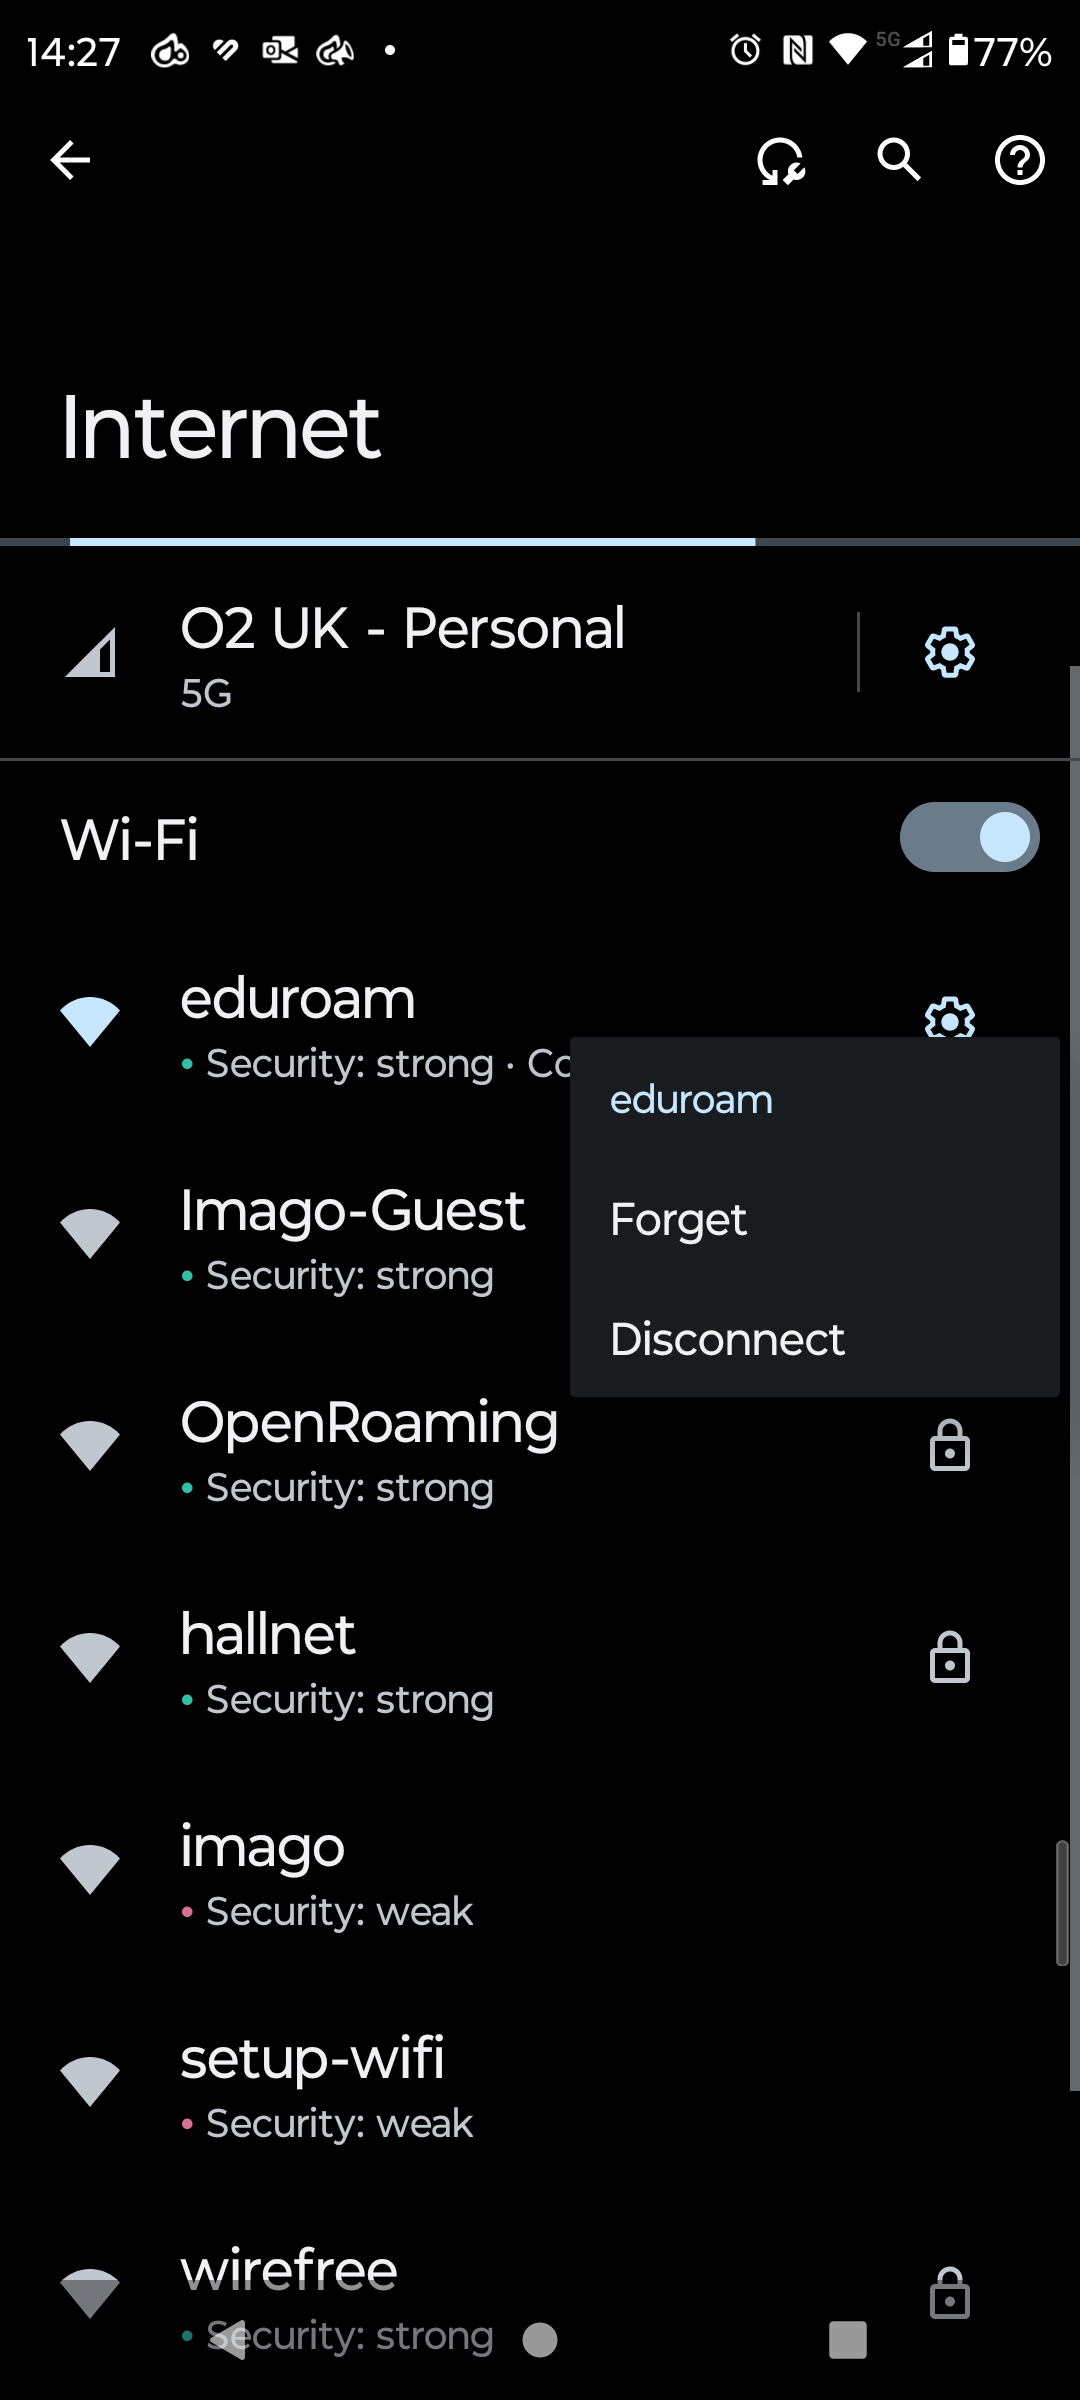 To forget a Wi-Fi network on your android device, open the wi-fi setting and long press until the options menu appears and select Forget